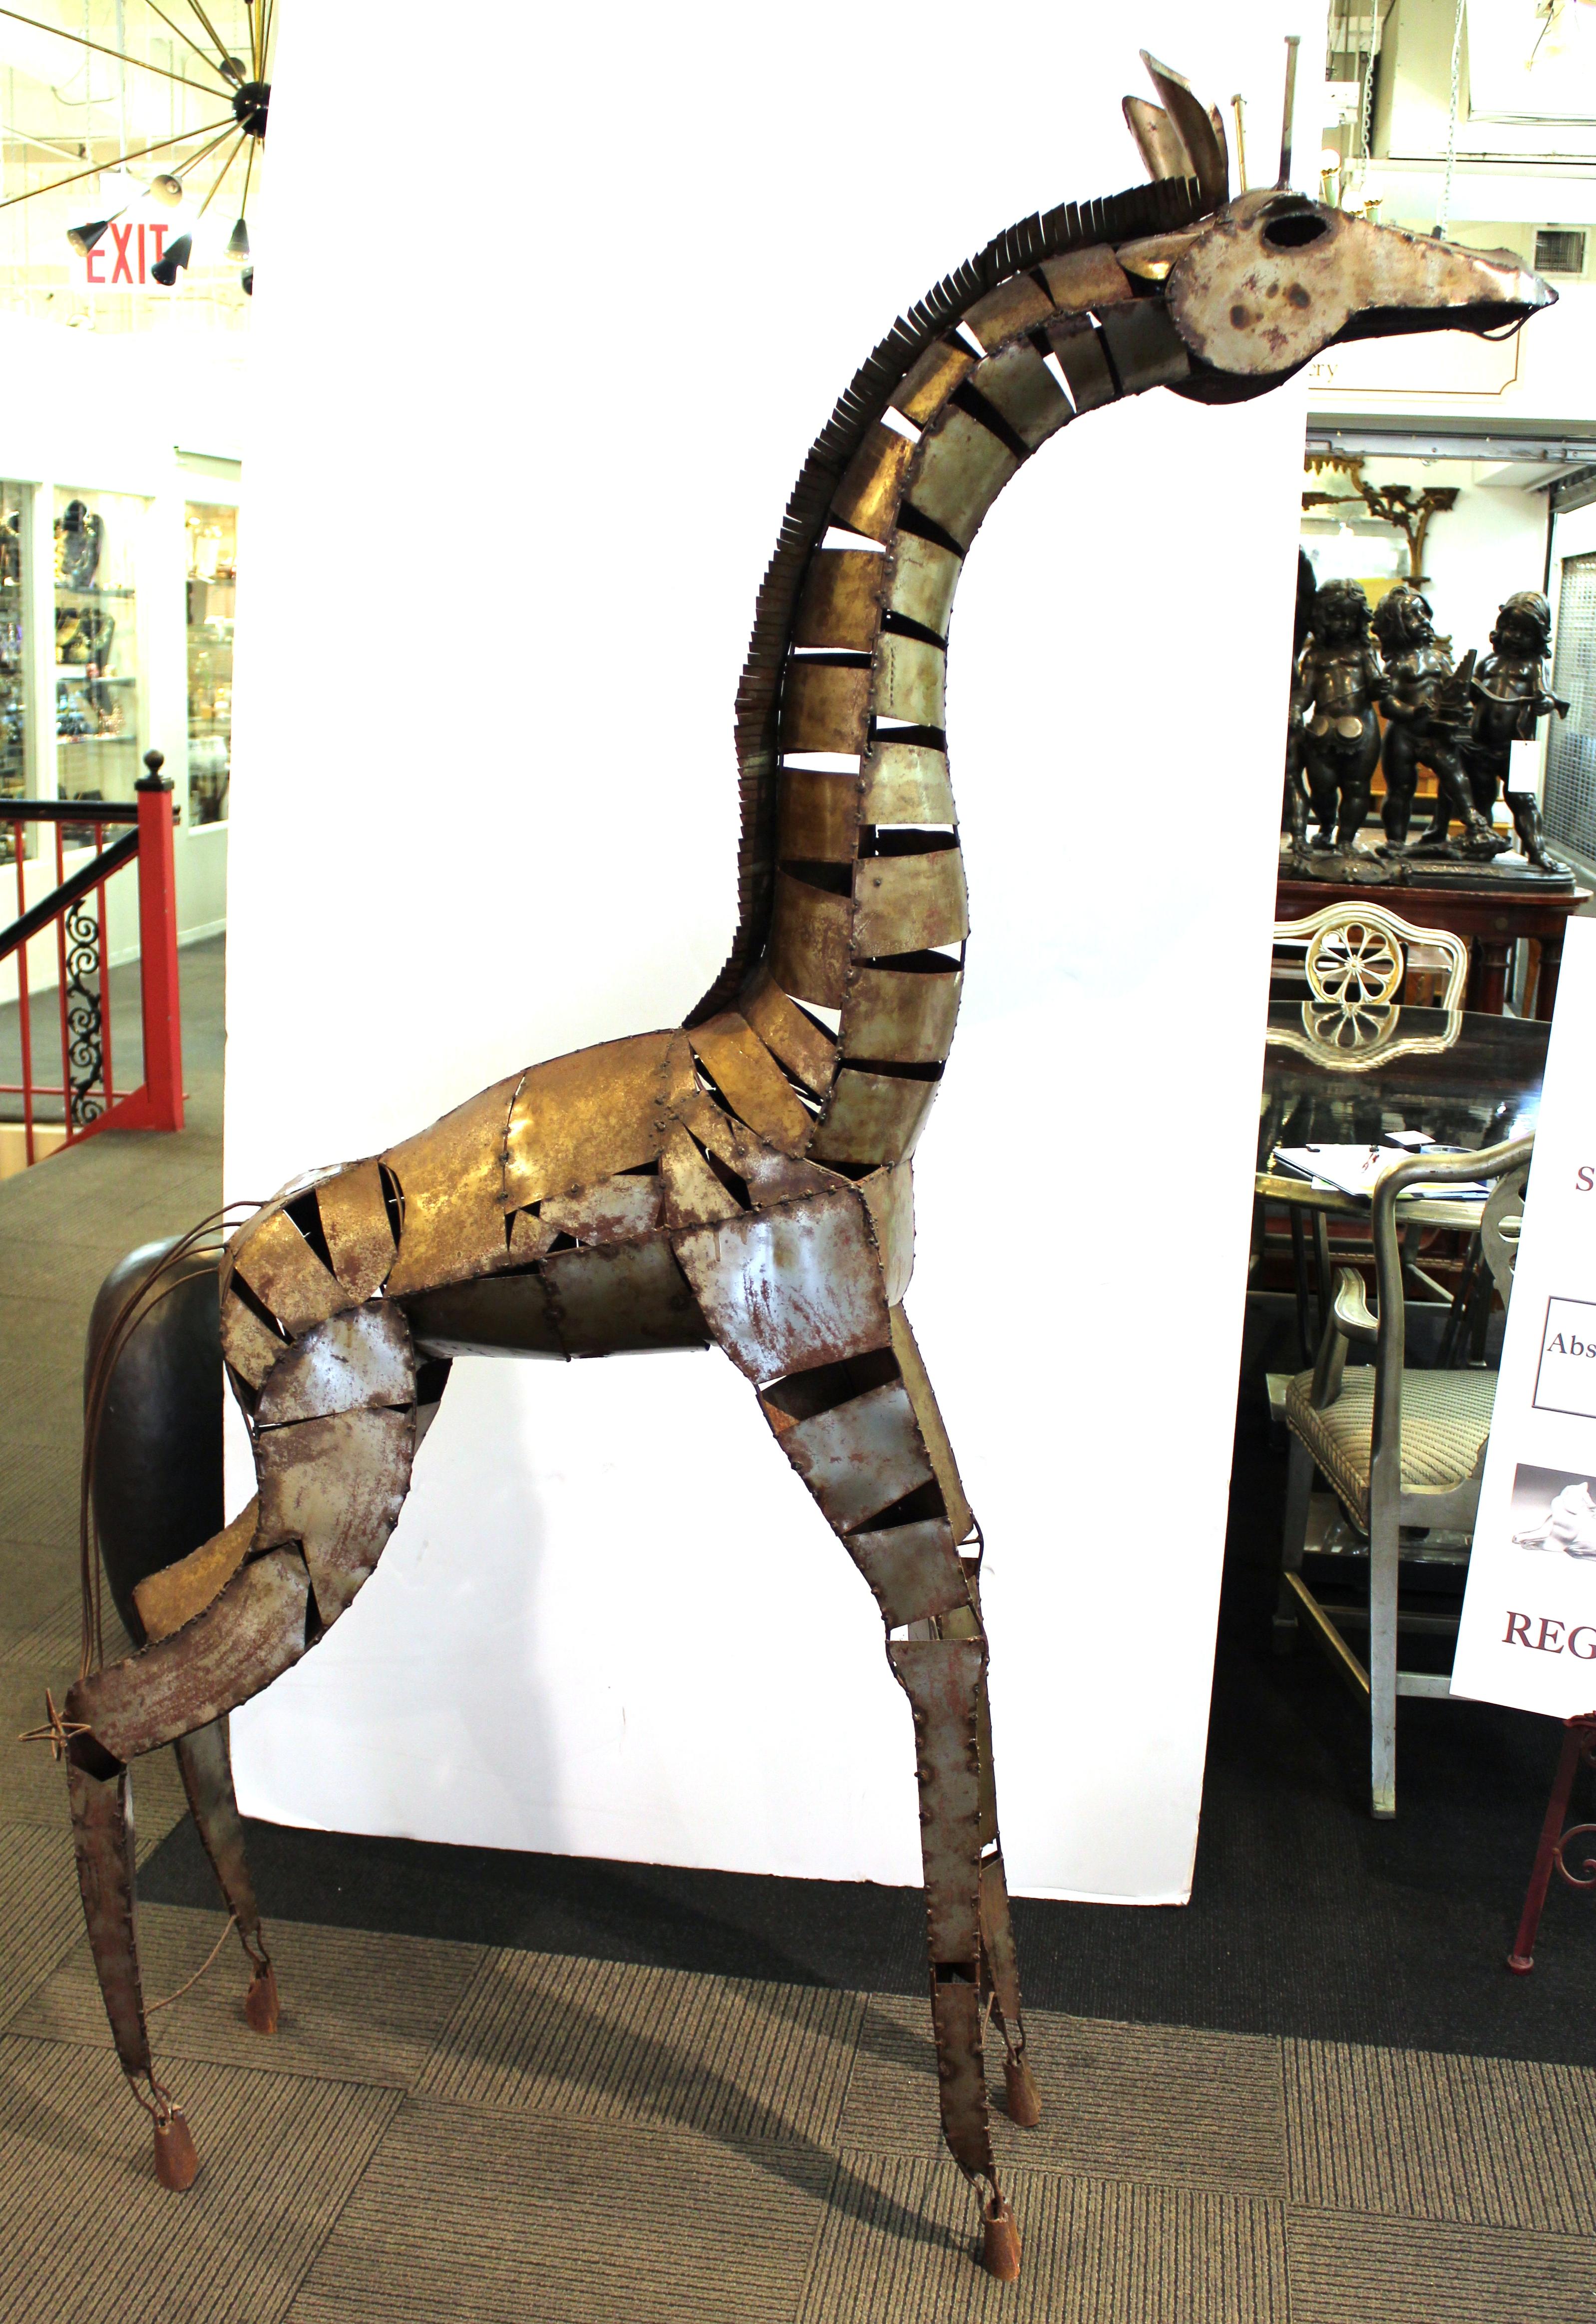 Brutalist style sculpture of a standing giraffe, made of welded metal pieces. With its height of almost 80 inches, the sculpture has a towering presence and is suited both for indoors and outdoors. Some wear and patina to the metal surface.